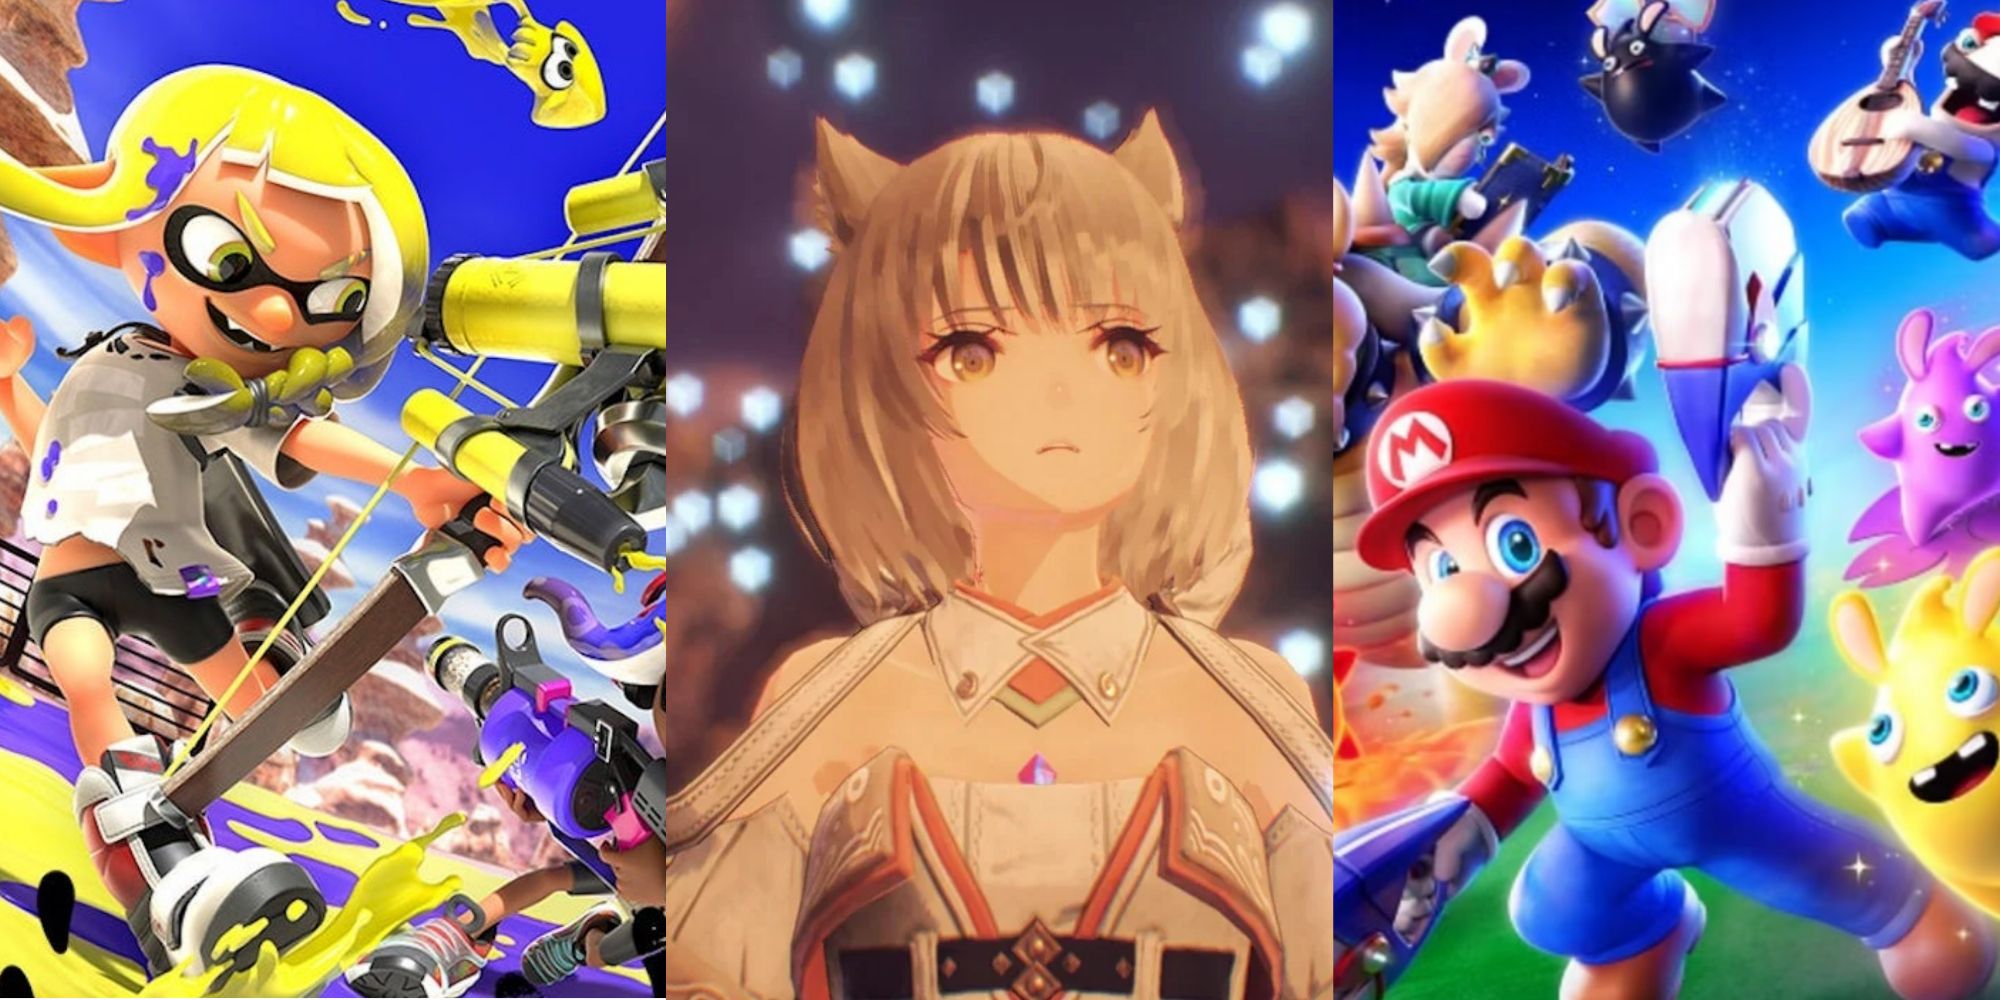 The Best Anime Games for Nintendo Switch